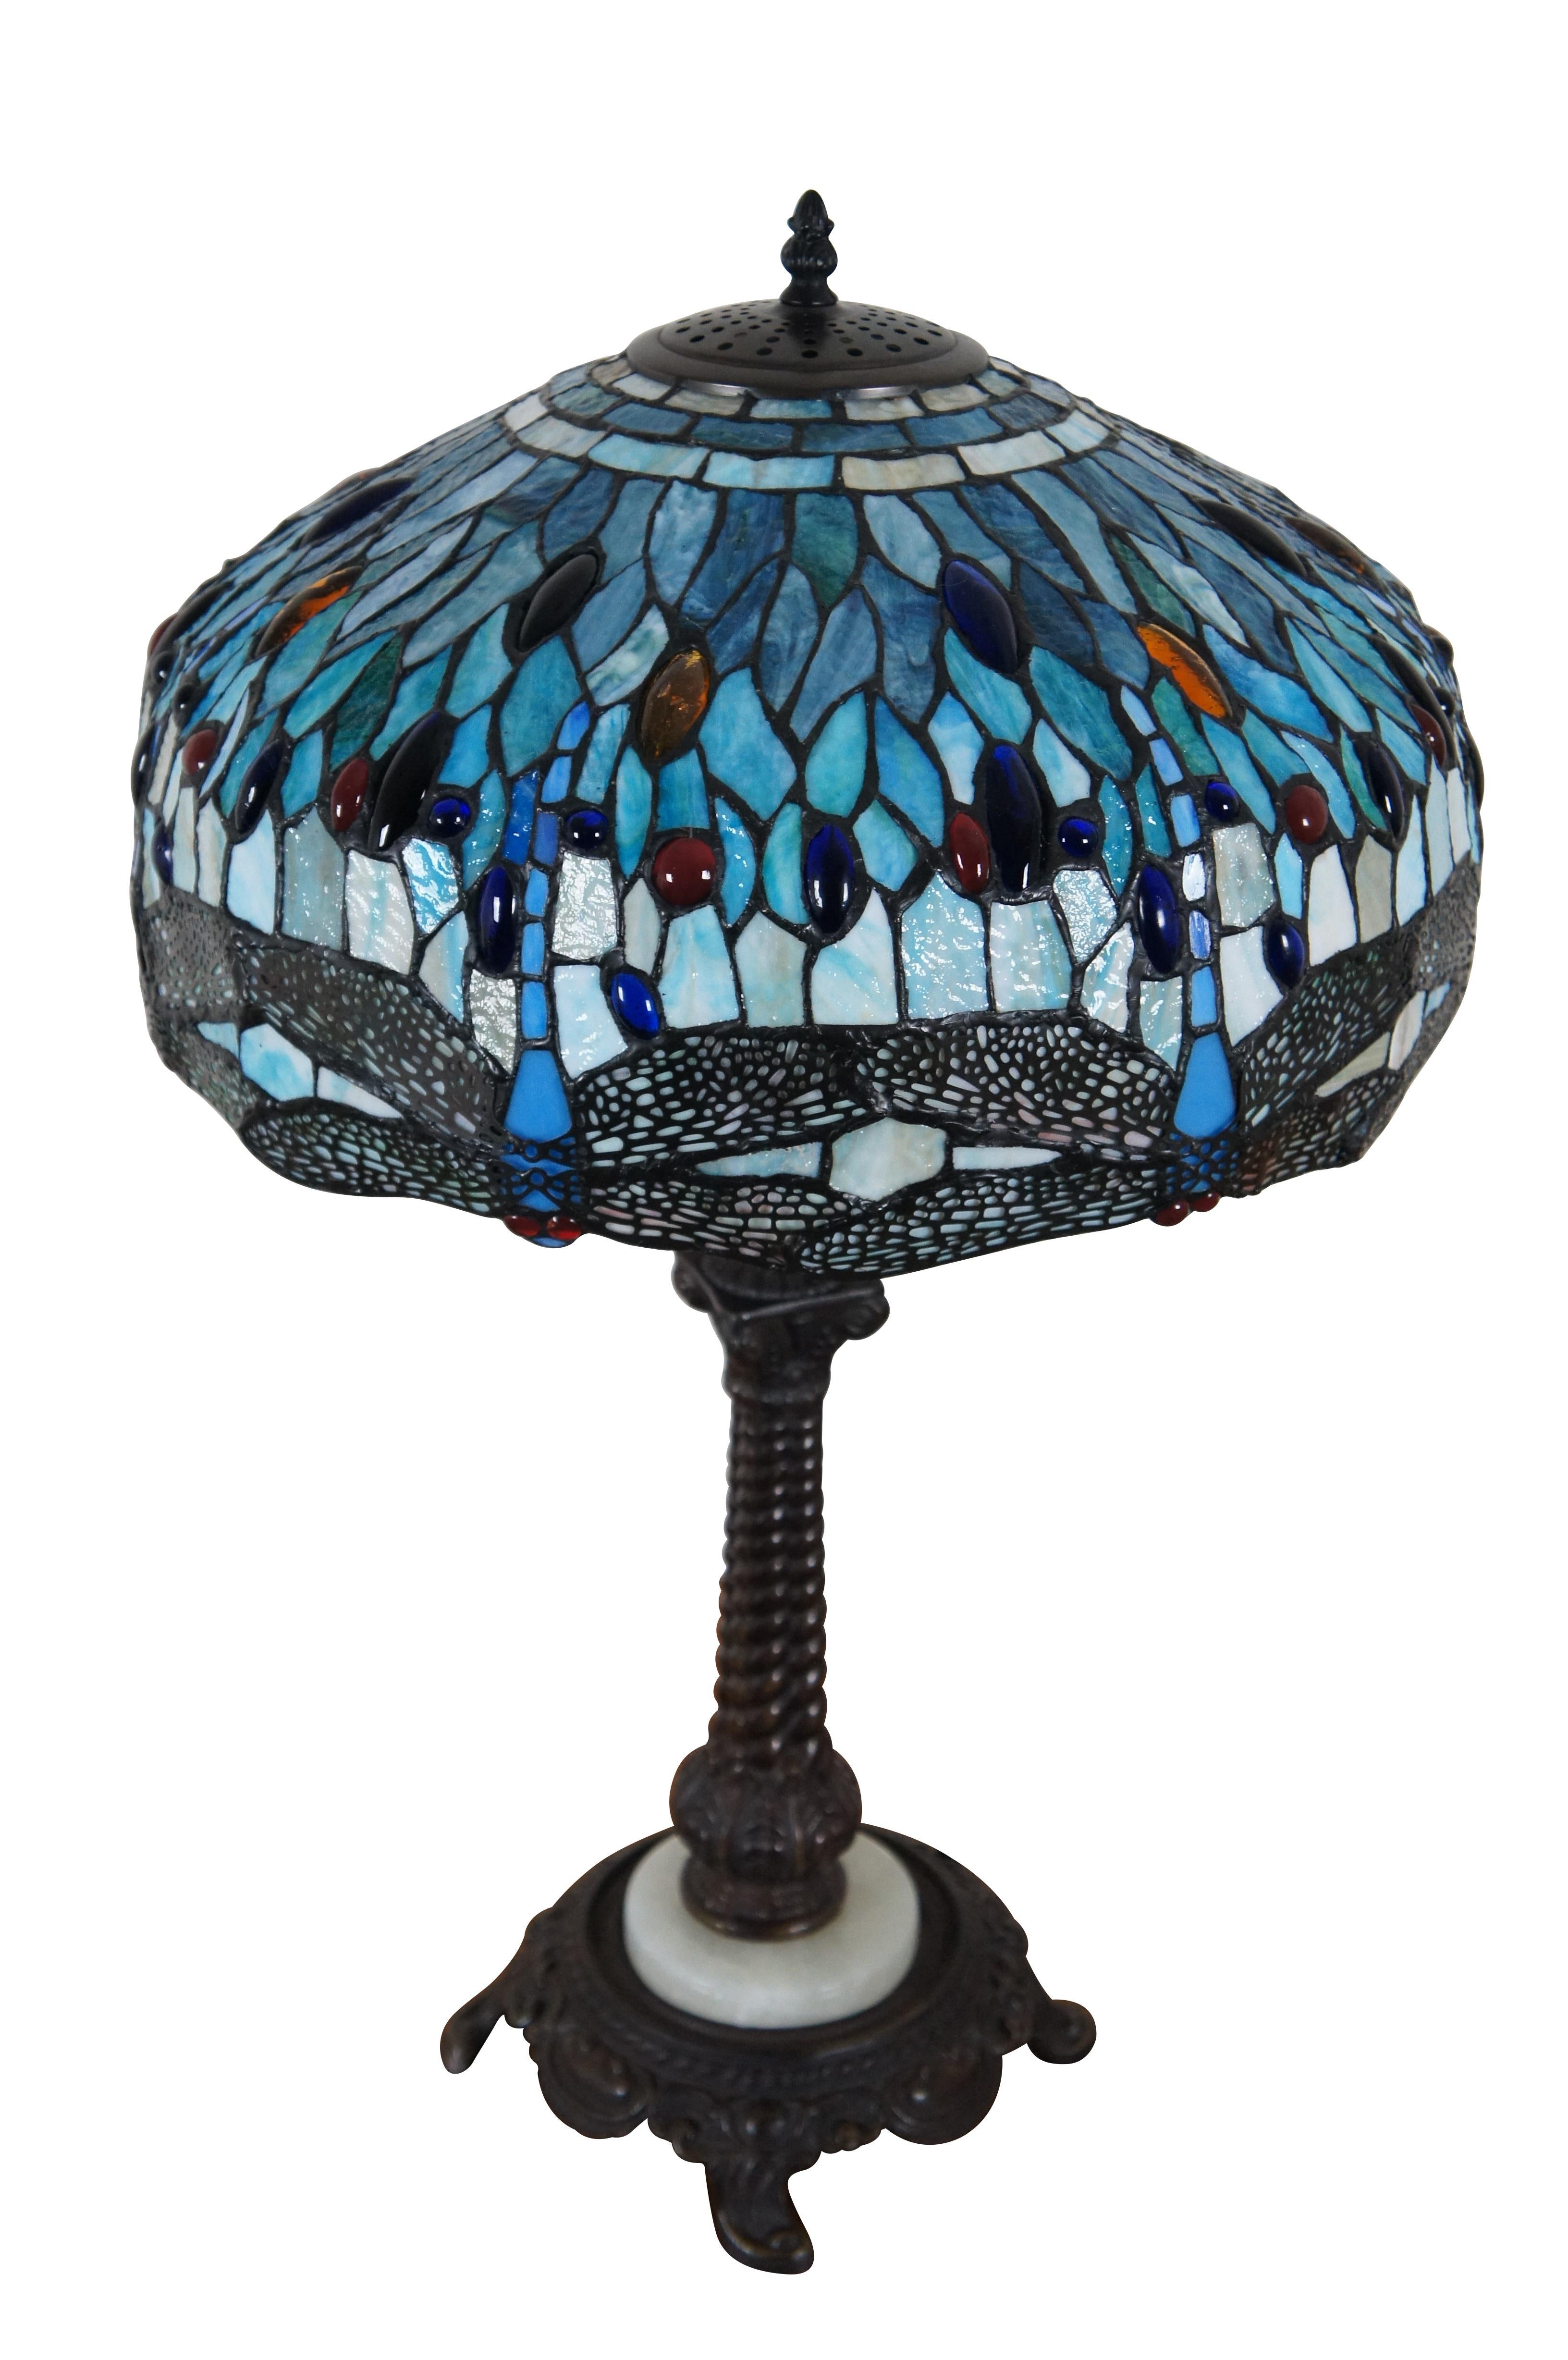 Vintage Tiffany style three light parlor table lamp.  Made of stained glass featuring Art Nouveau styling with a Dragonfly shade and Corinthian column acanthus base accented with stone.

Dimensions:
17” x 28” (Diameter x Height)